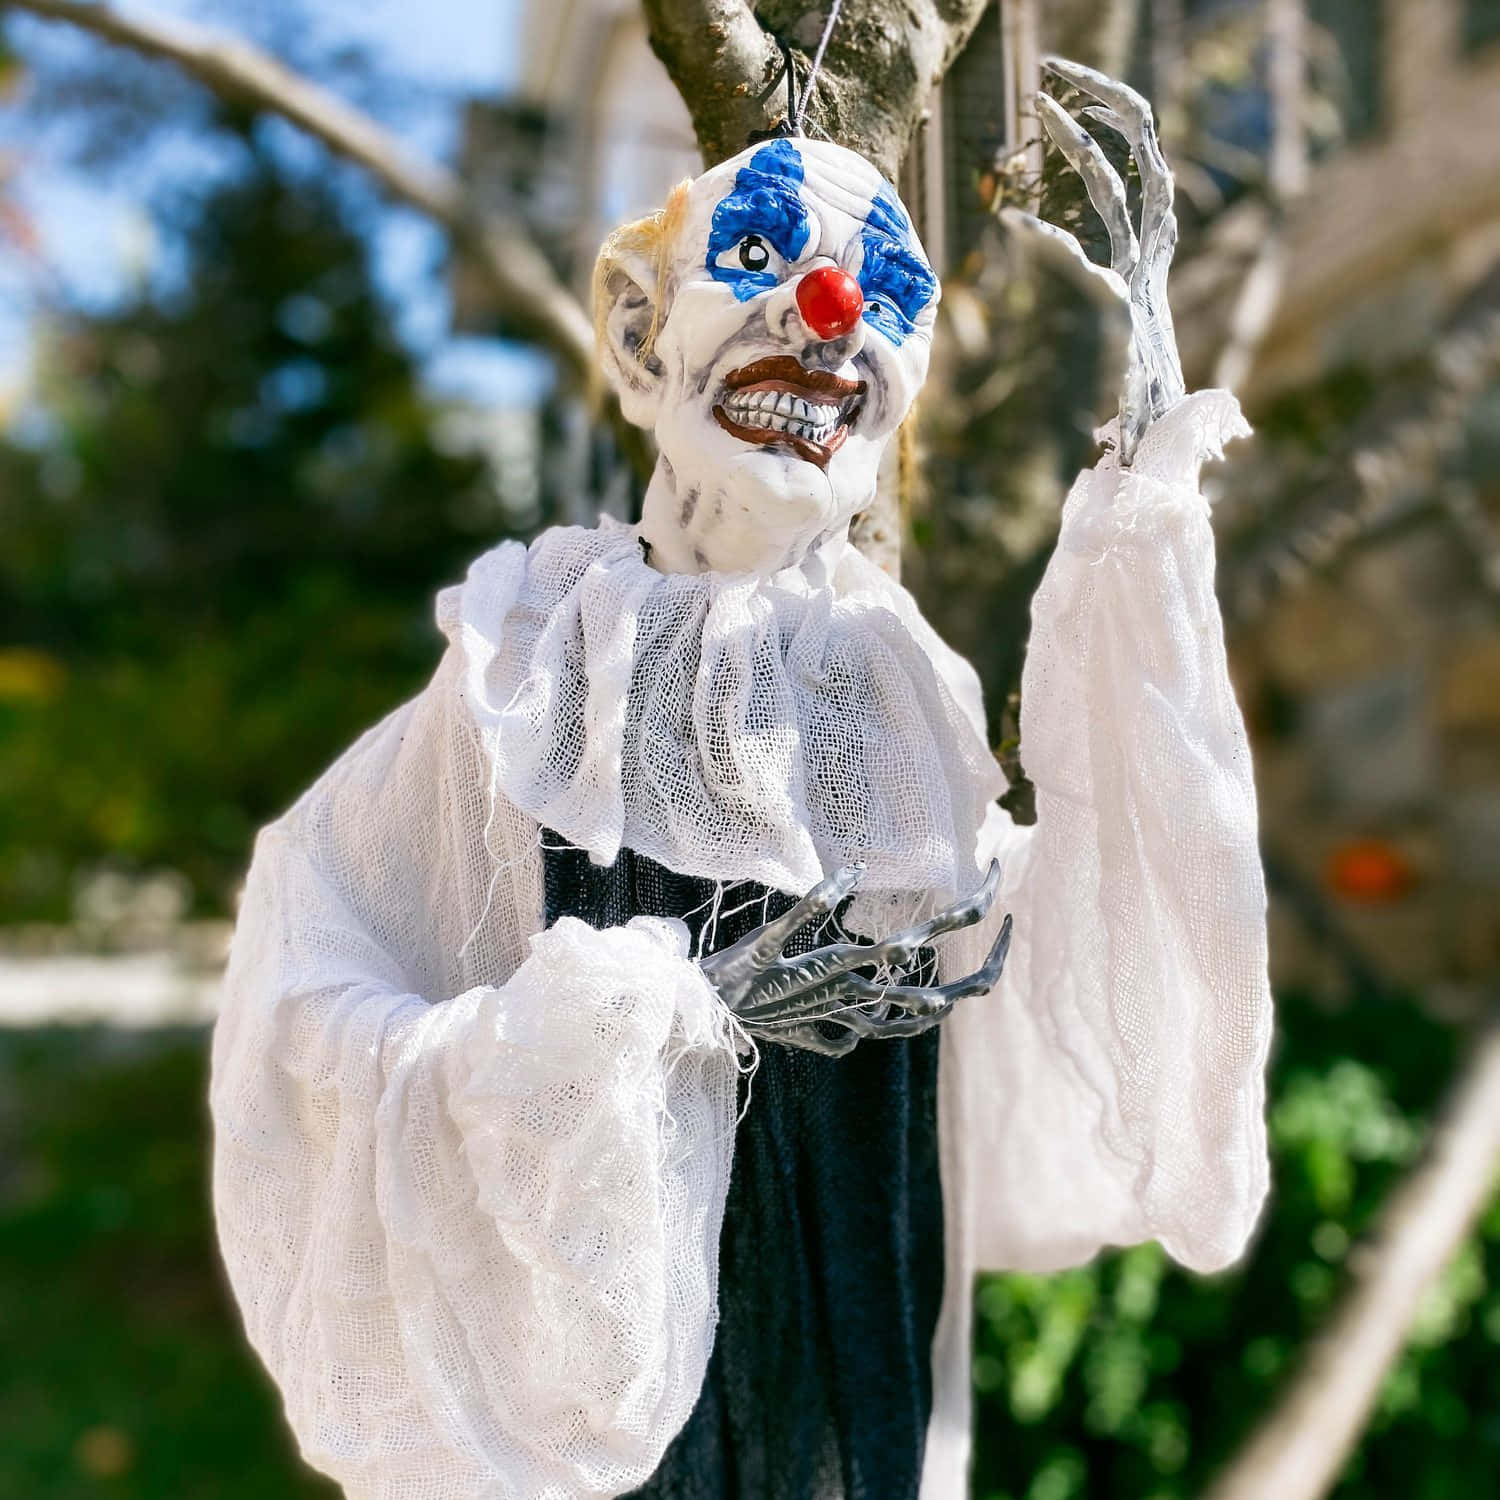 A Clown Hanging From A Tree In A Yard